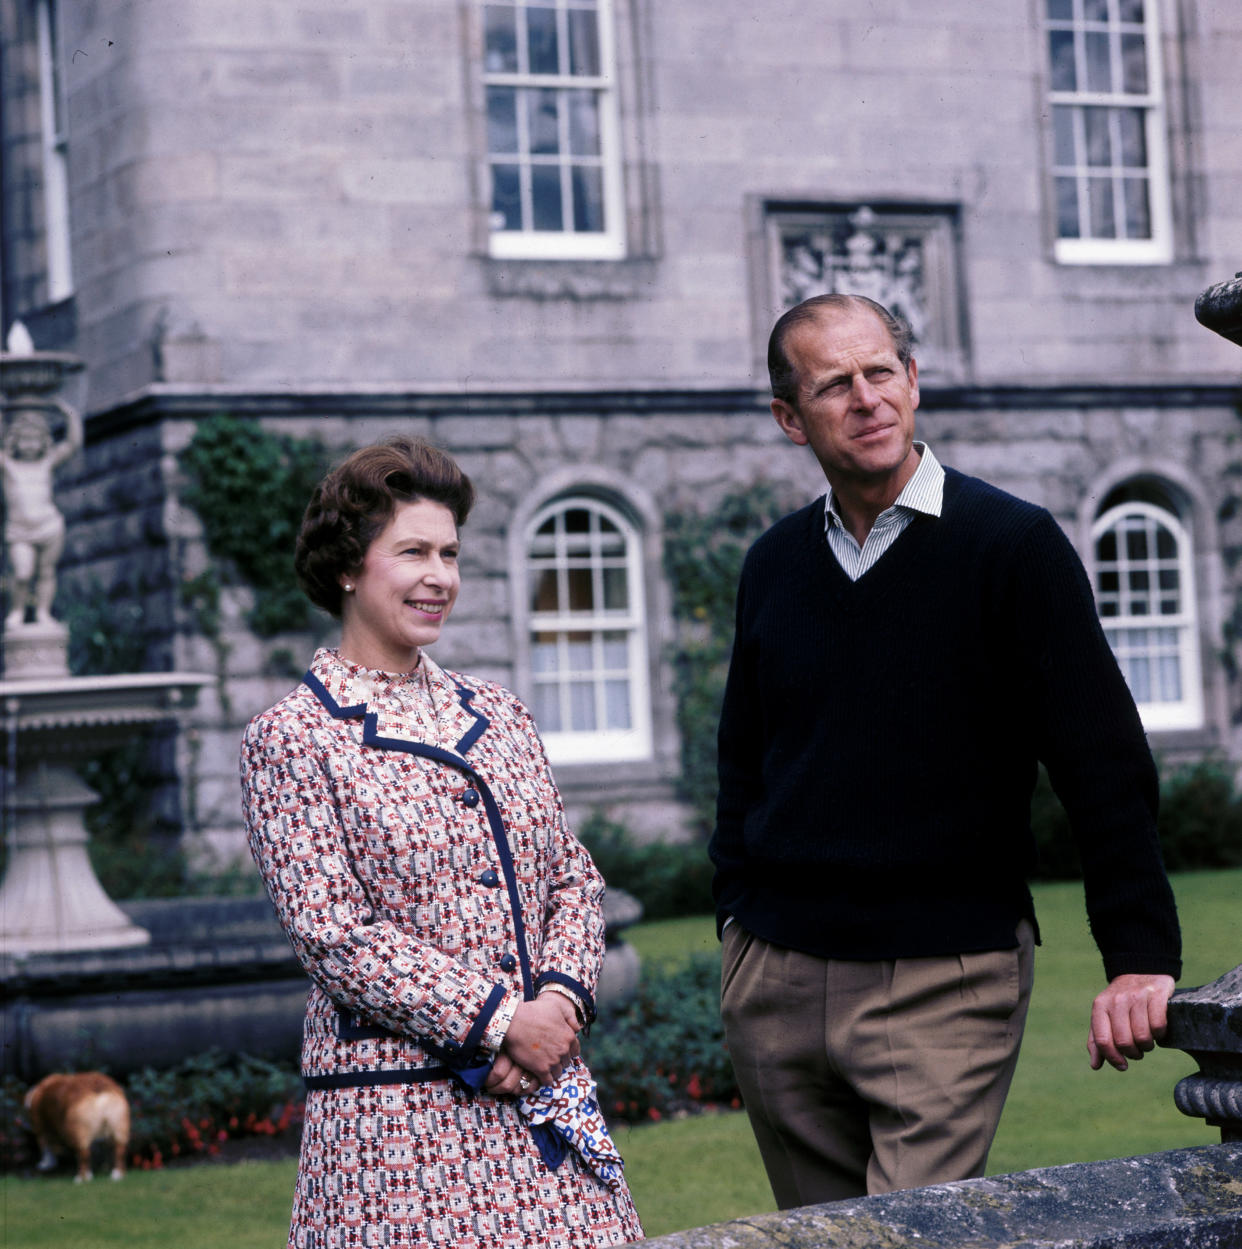 Prince Philip and Queen Elizabeth II visit the Balmoral estate every summer. [Photo: Getty]